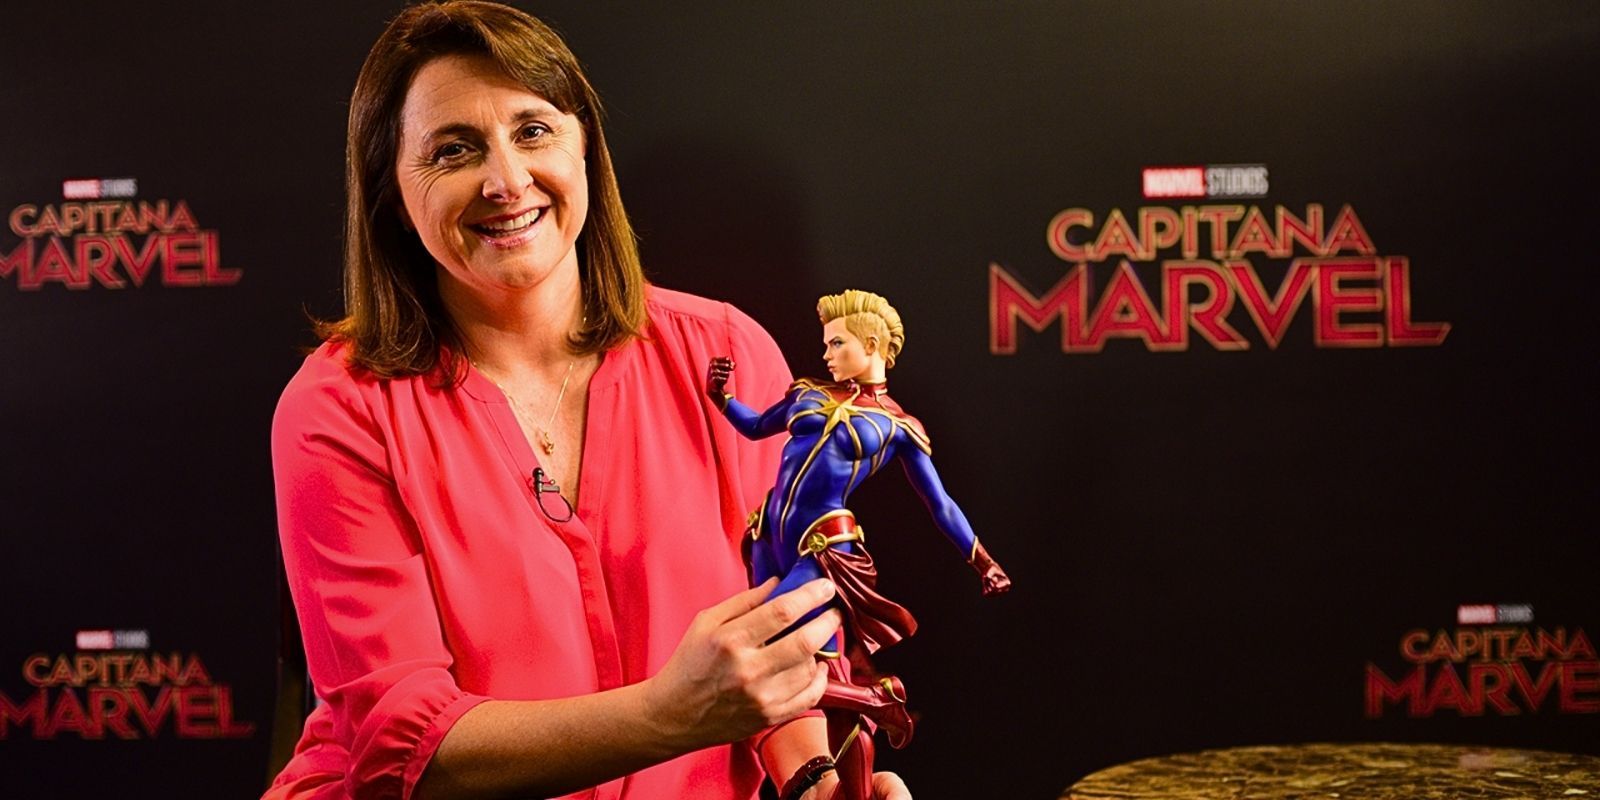 Marvel Actors Rebuff Reports of Victoria Alonso’s Toxicity